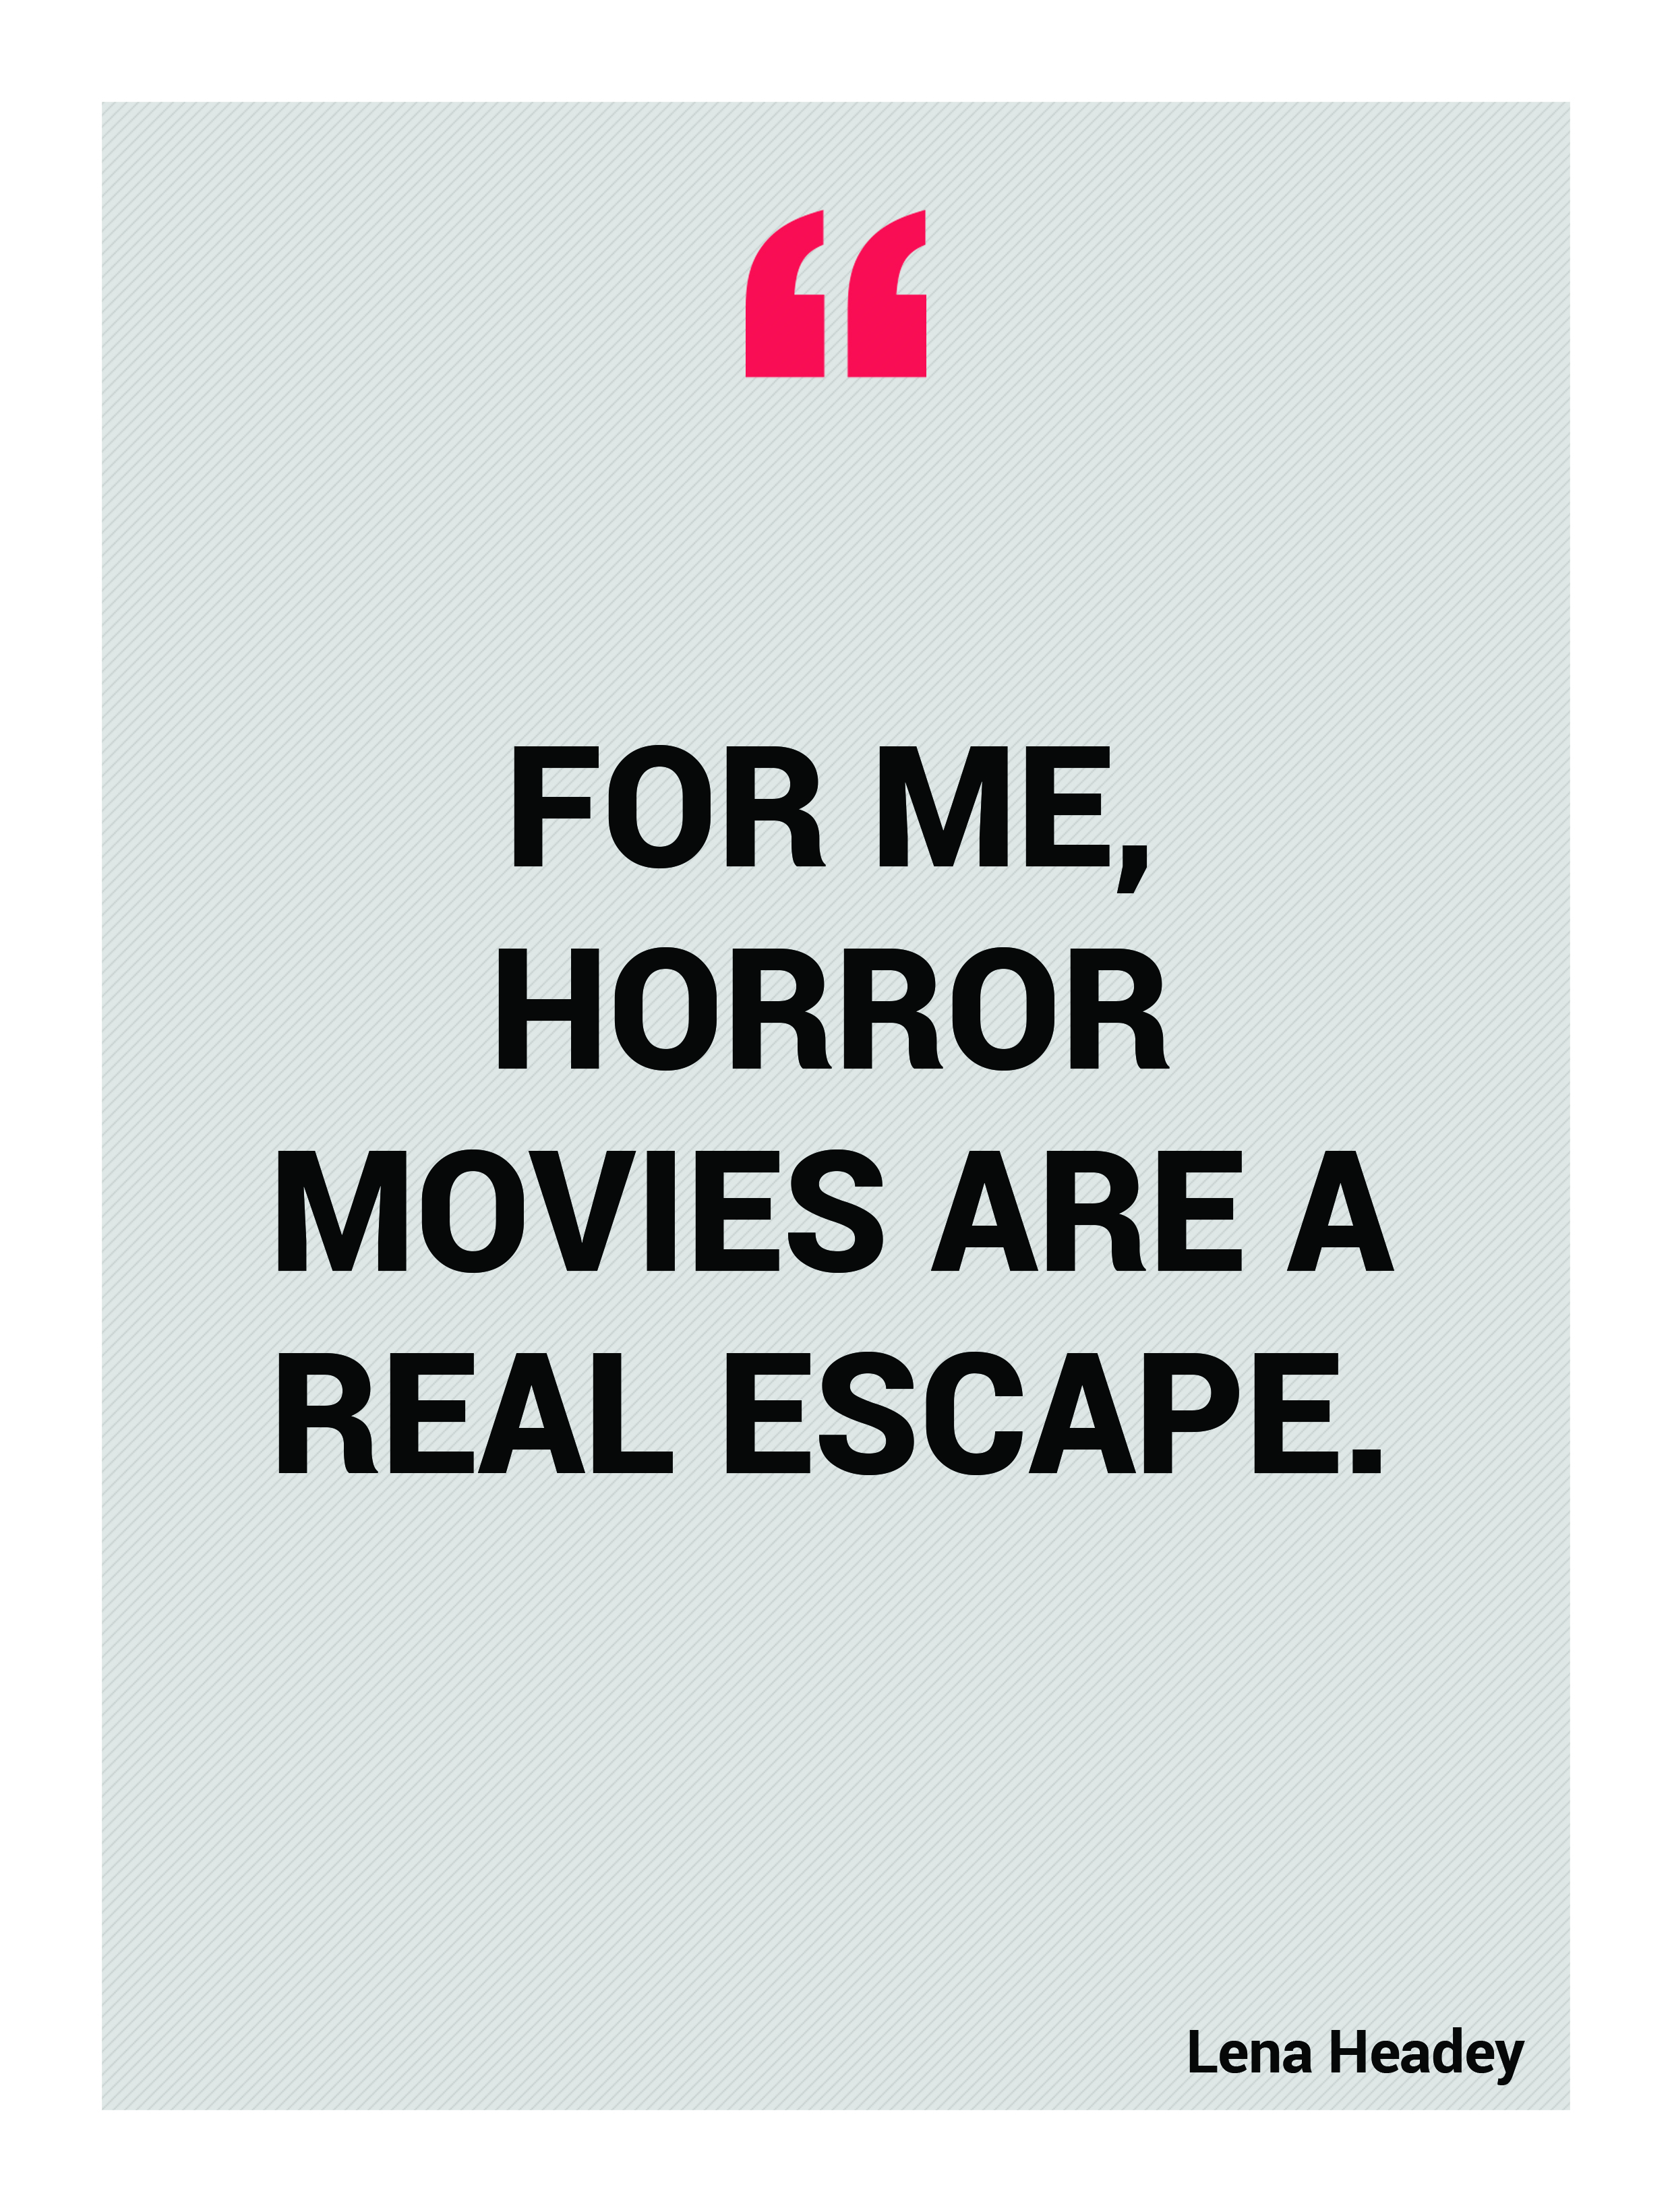 For me, horror movies are a real escape. Lena Headey